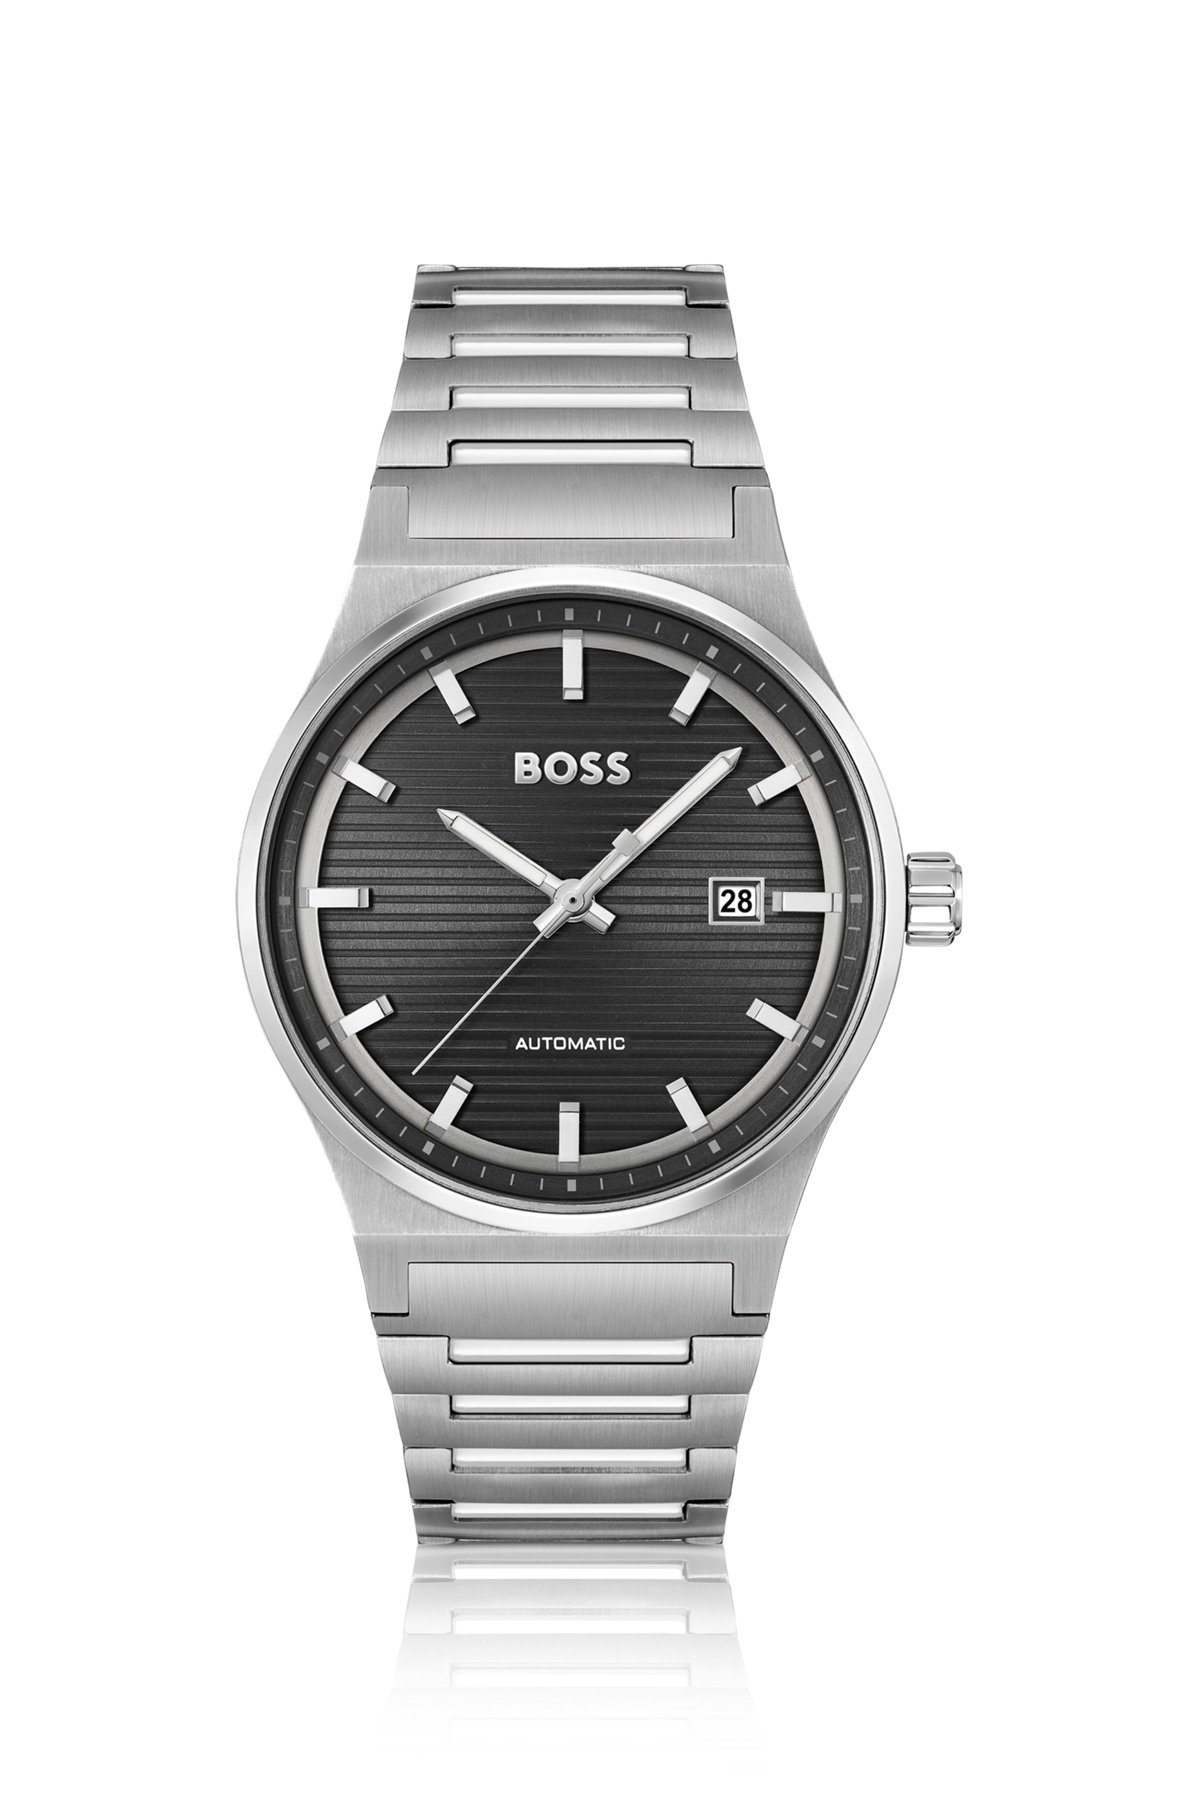 BOSS - Link-bracelet automatic watch with groove-textured dial